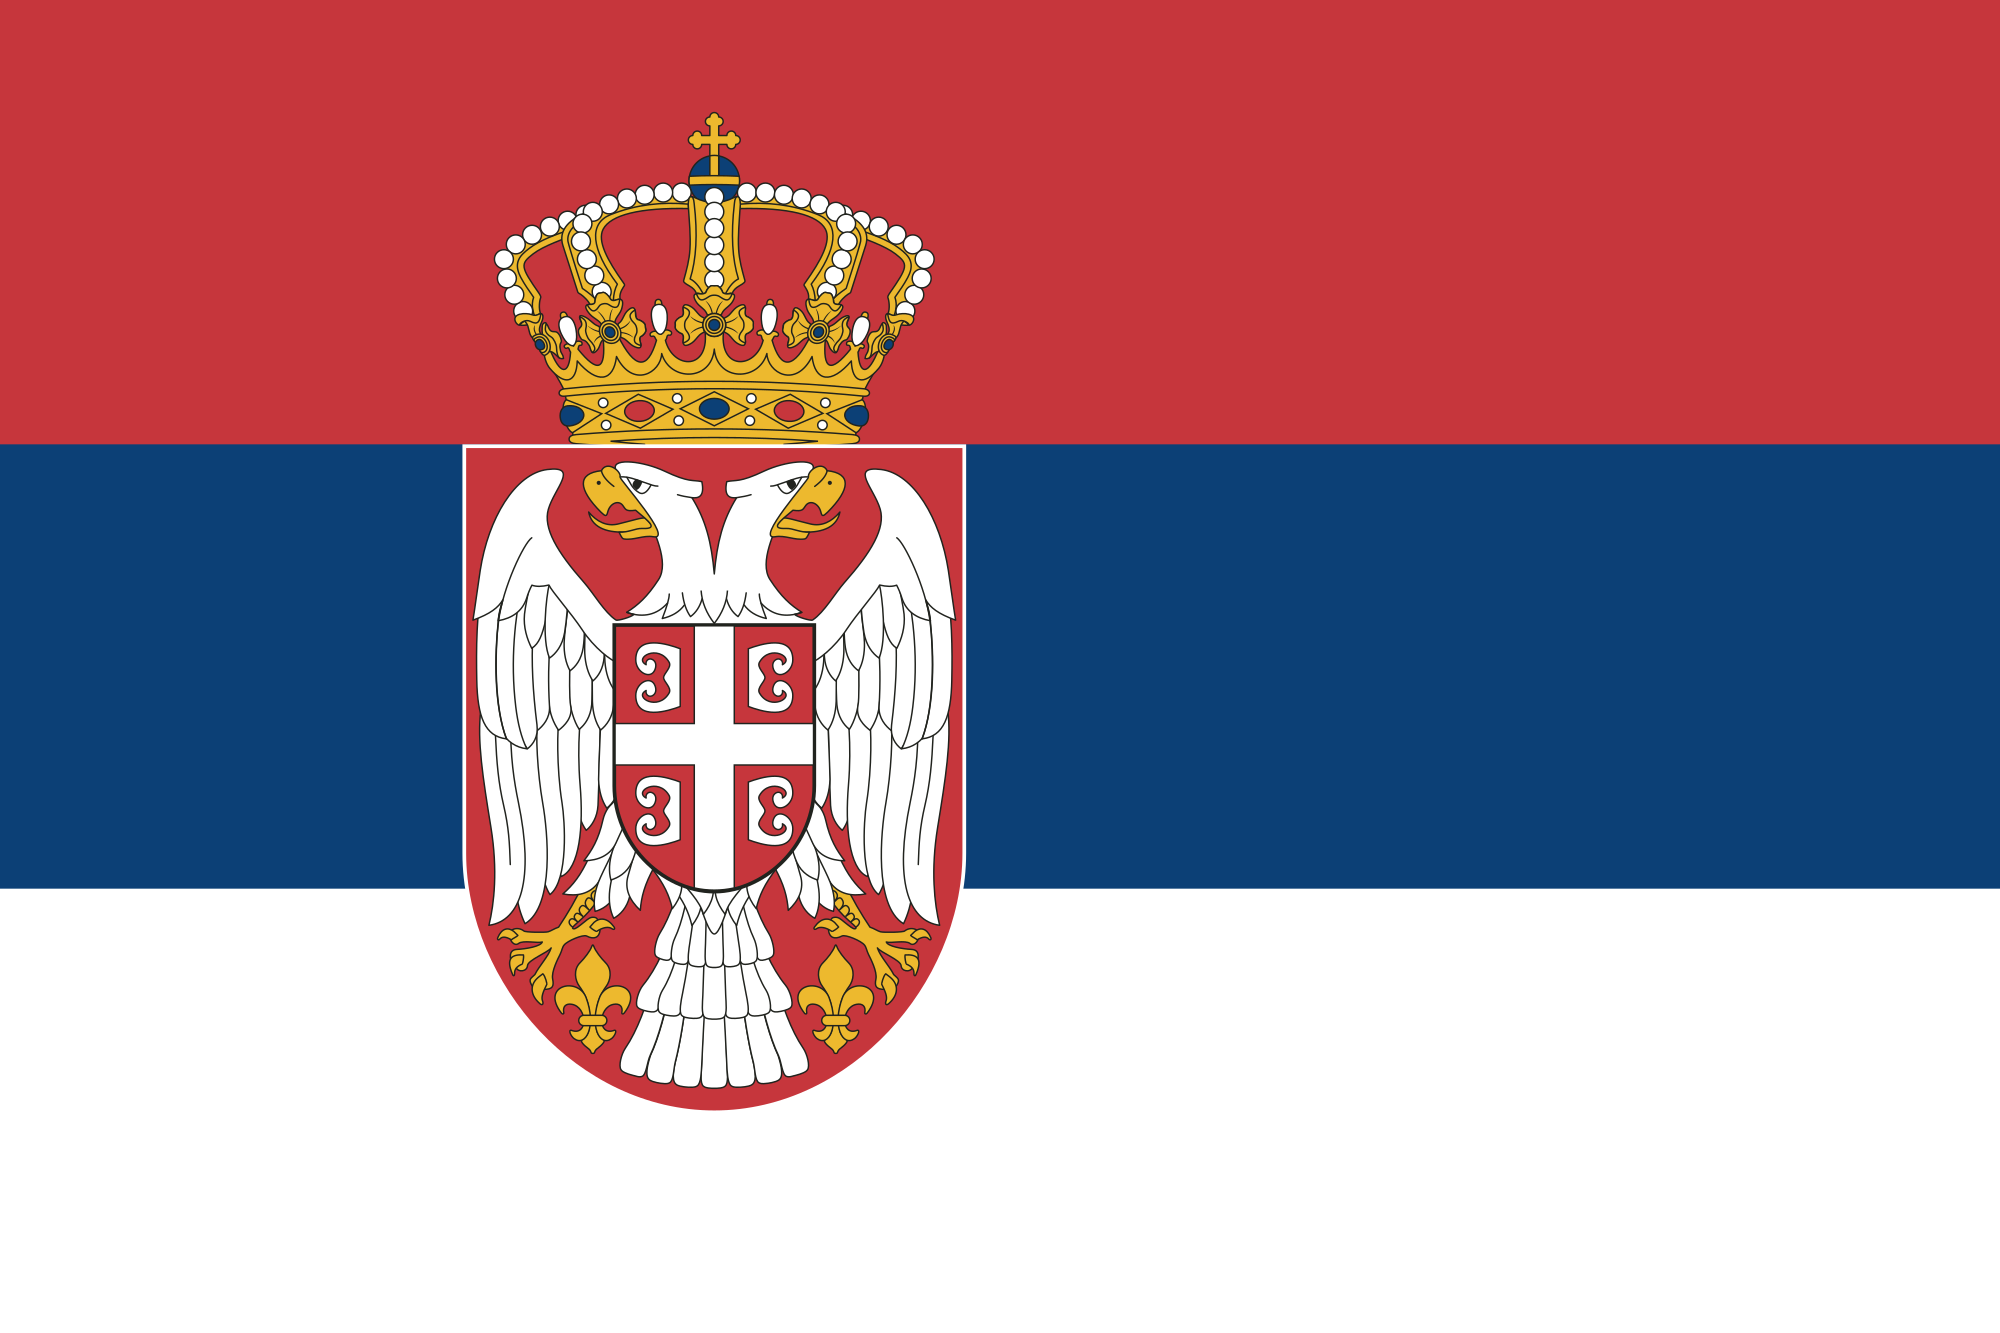 https://upload.wikimedia.org/wikipedia/commons/thumb/f/ff/Flag_of_Serbia.svg/2000px-Flag_of_Serbia.svg.png